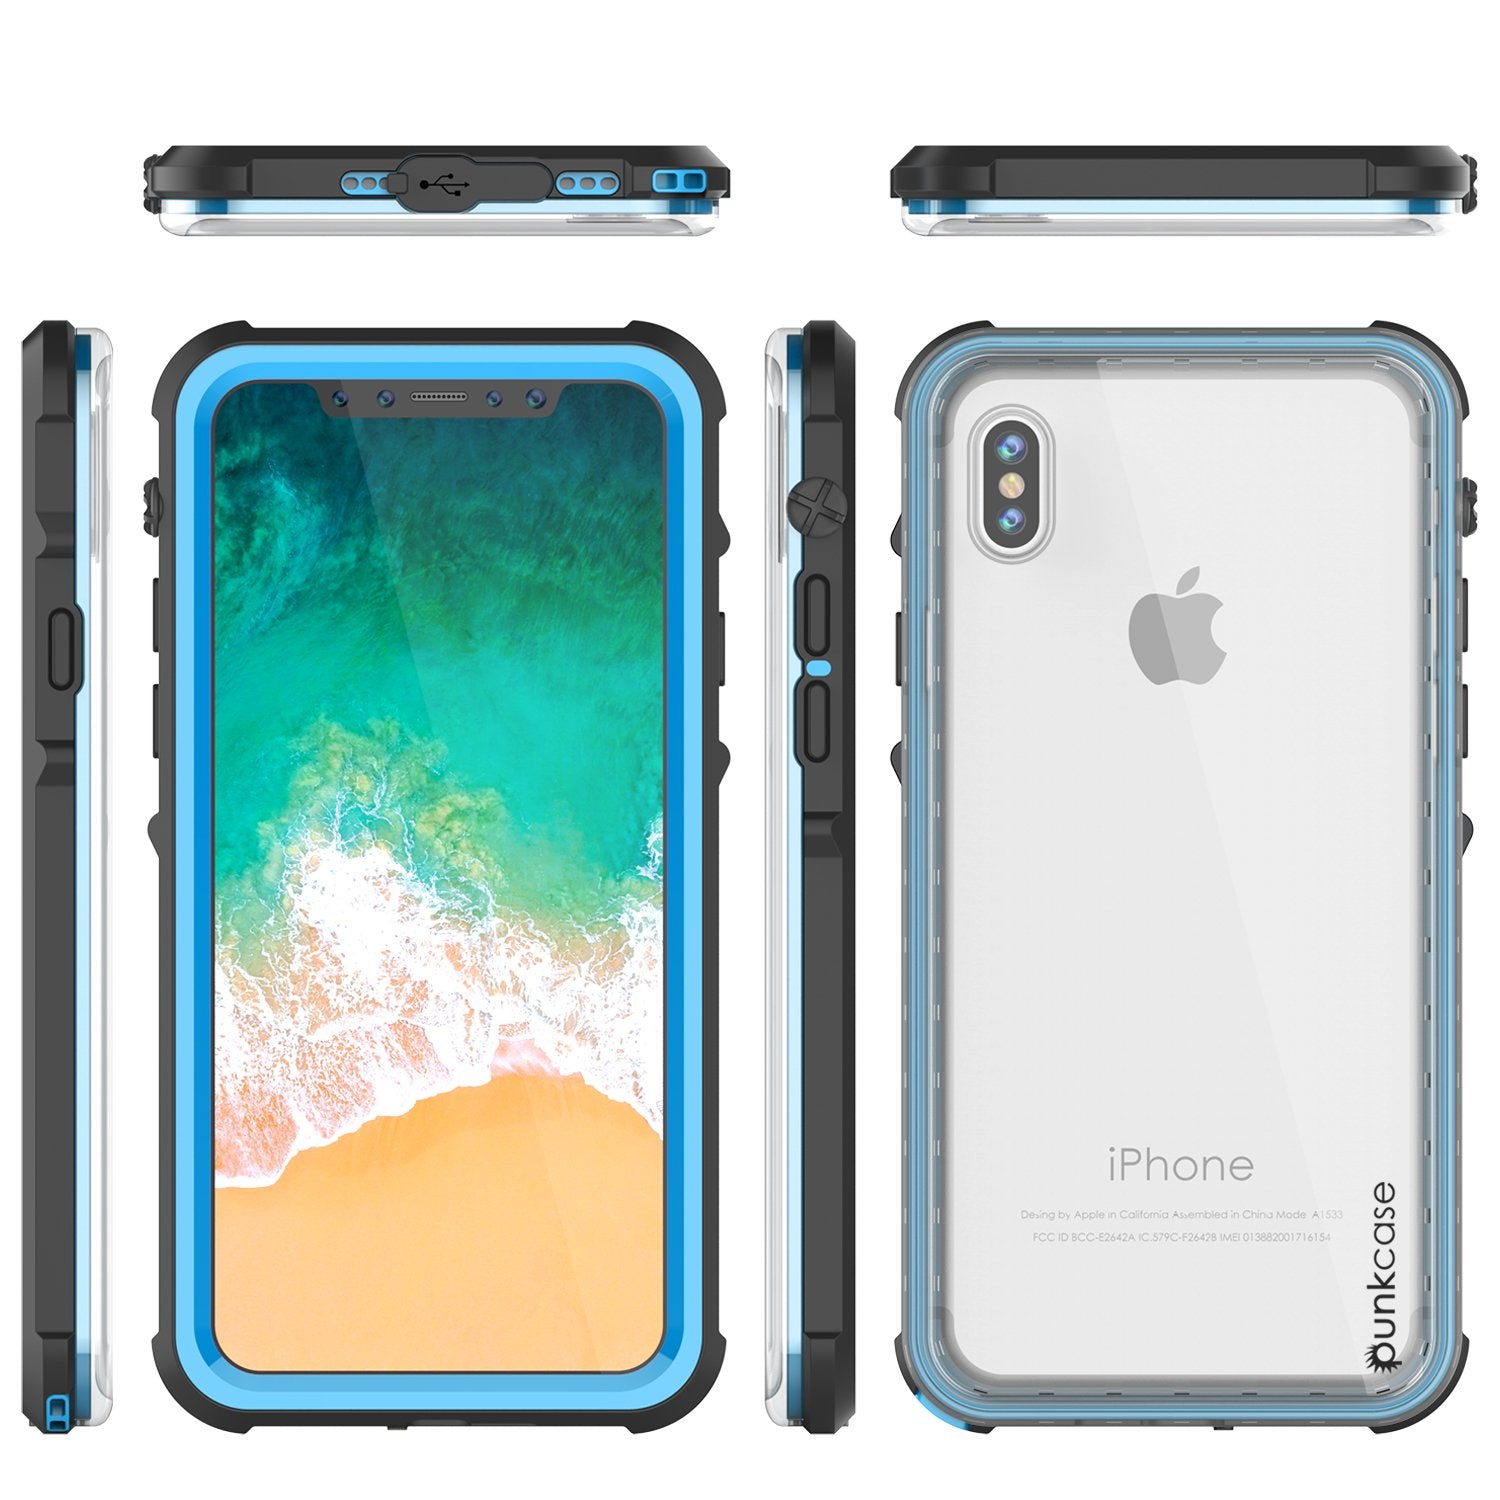 iPhone X Case, PUNKCase [CRYSTAL SERIES] Protective IP68 Certified Cover W/ Attached Screen Protector - DustPROOF, ShockPROOF, SnowPROOF - Ultra Slim Fit for Apple iPhone 10 [LIGHT BLUE]